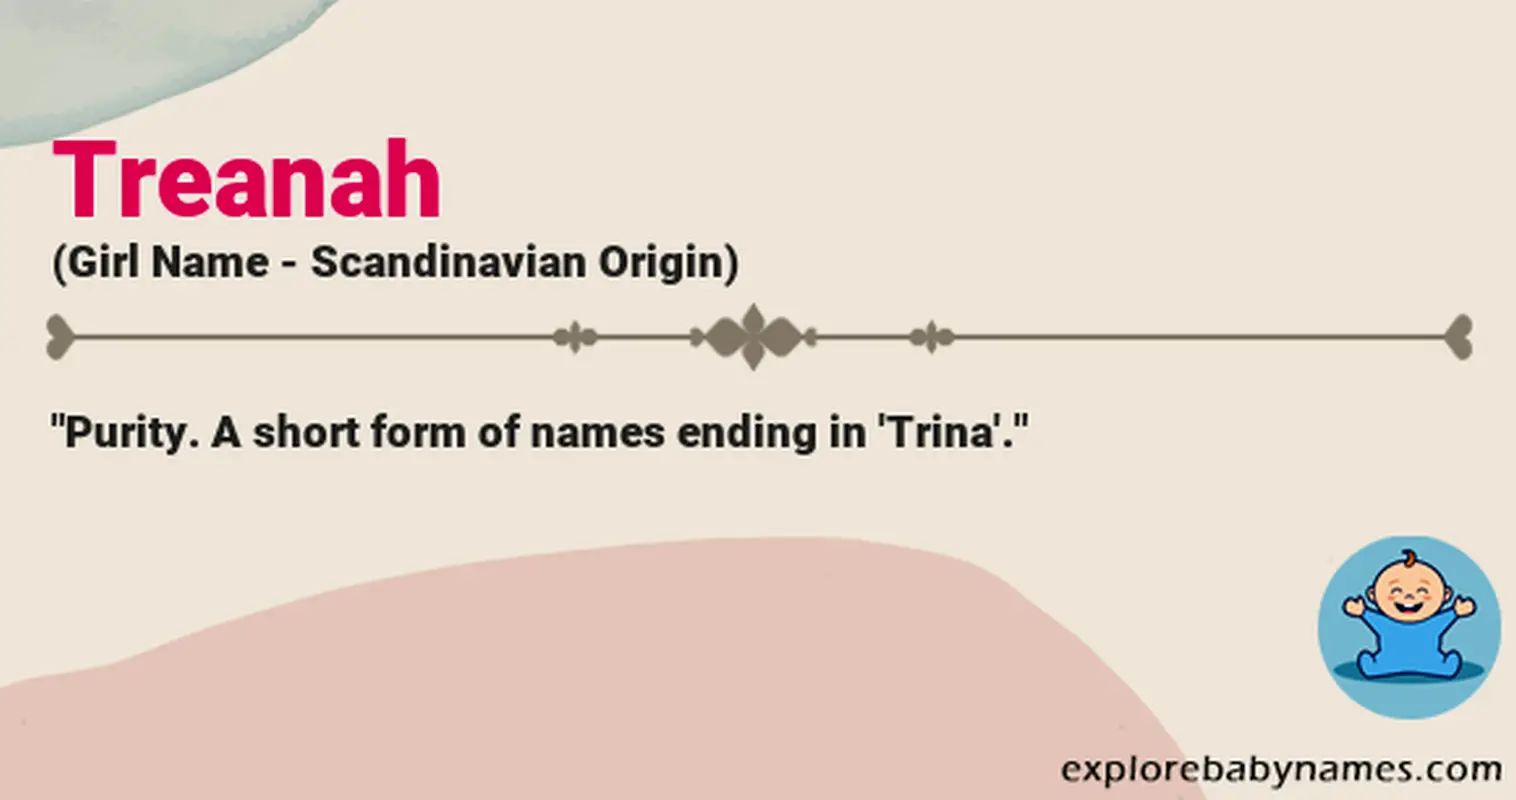 Meaning of Treanah